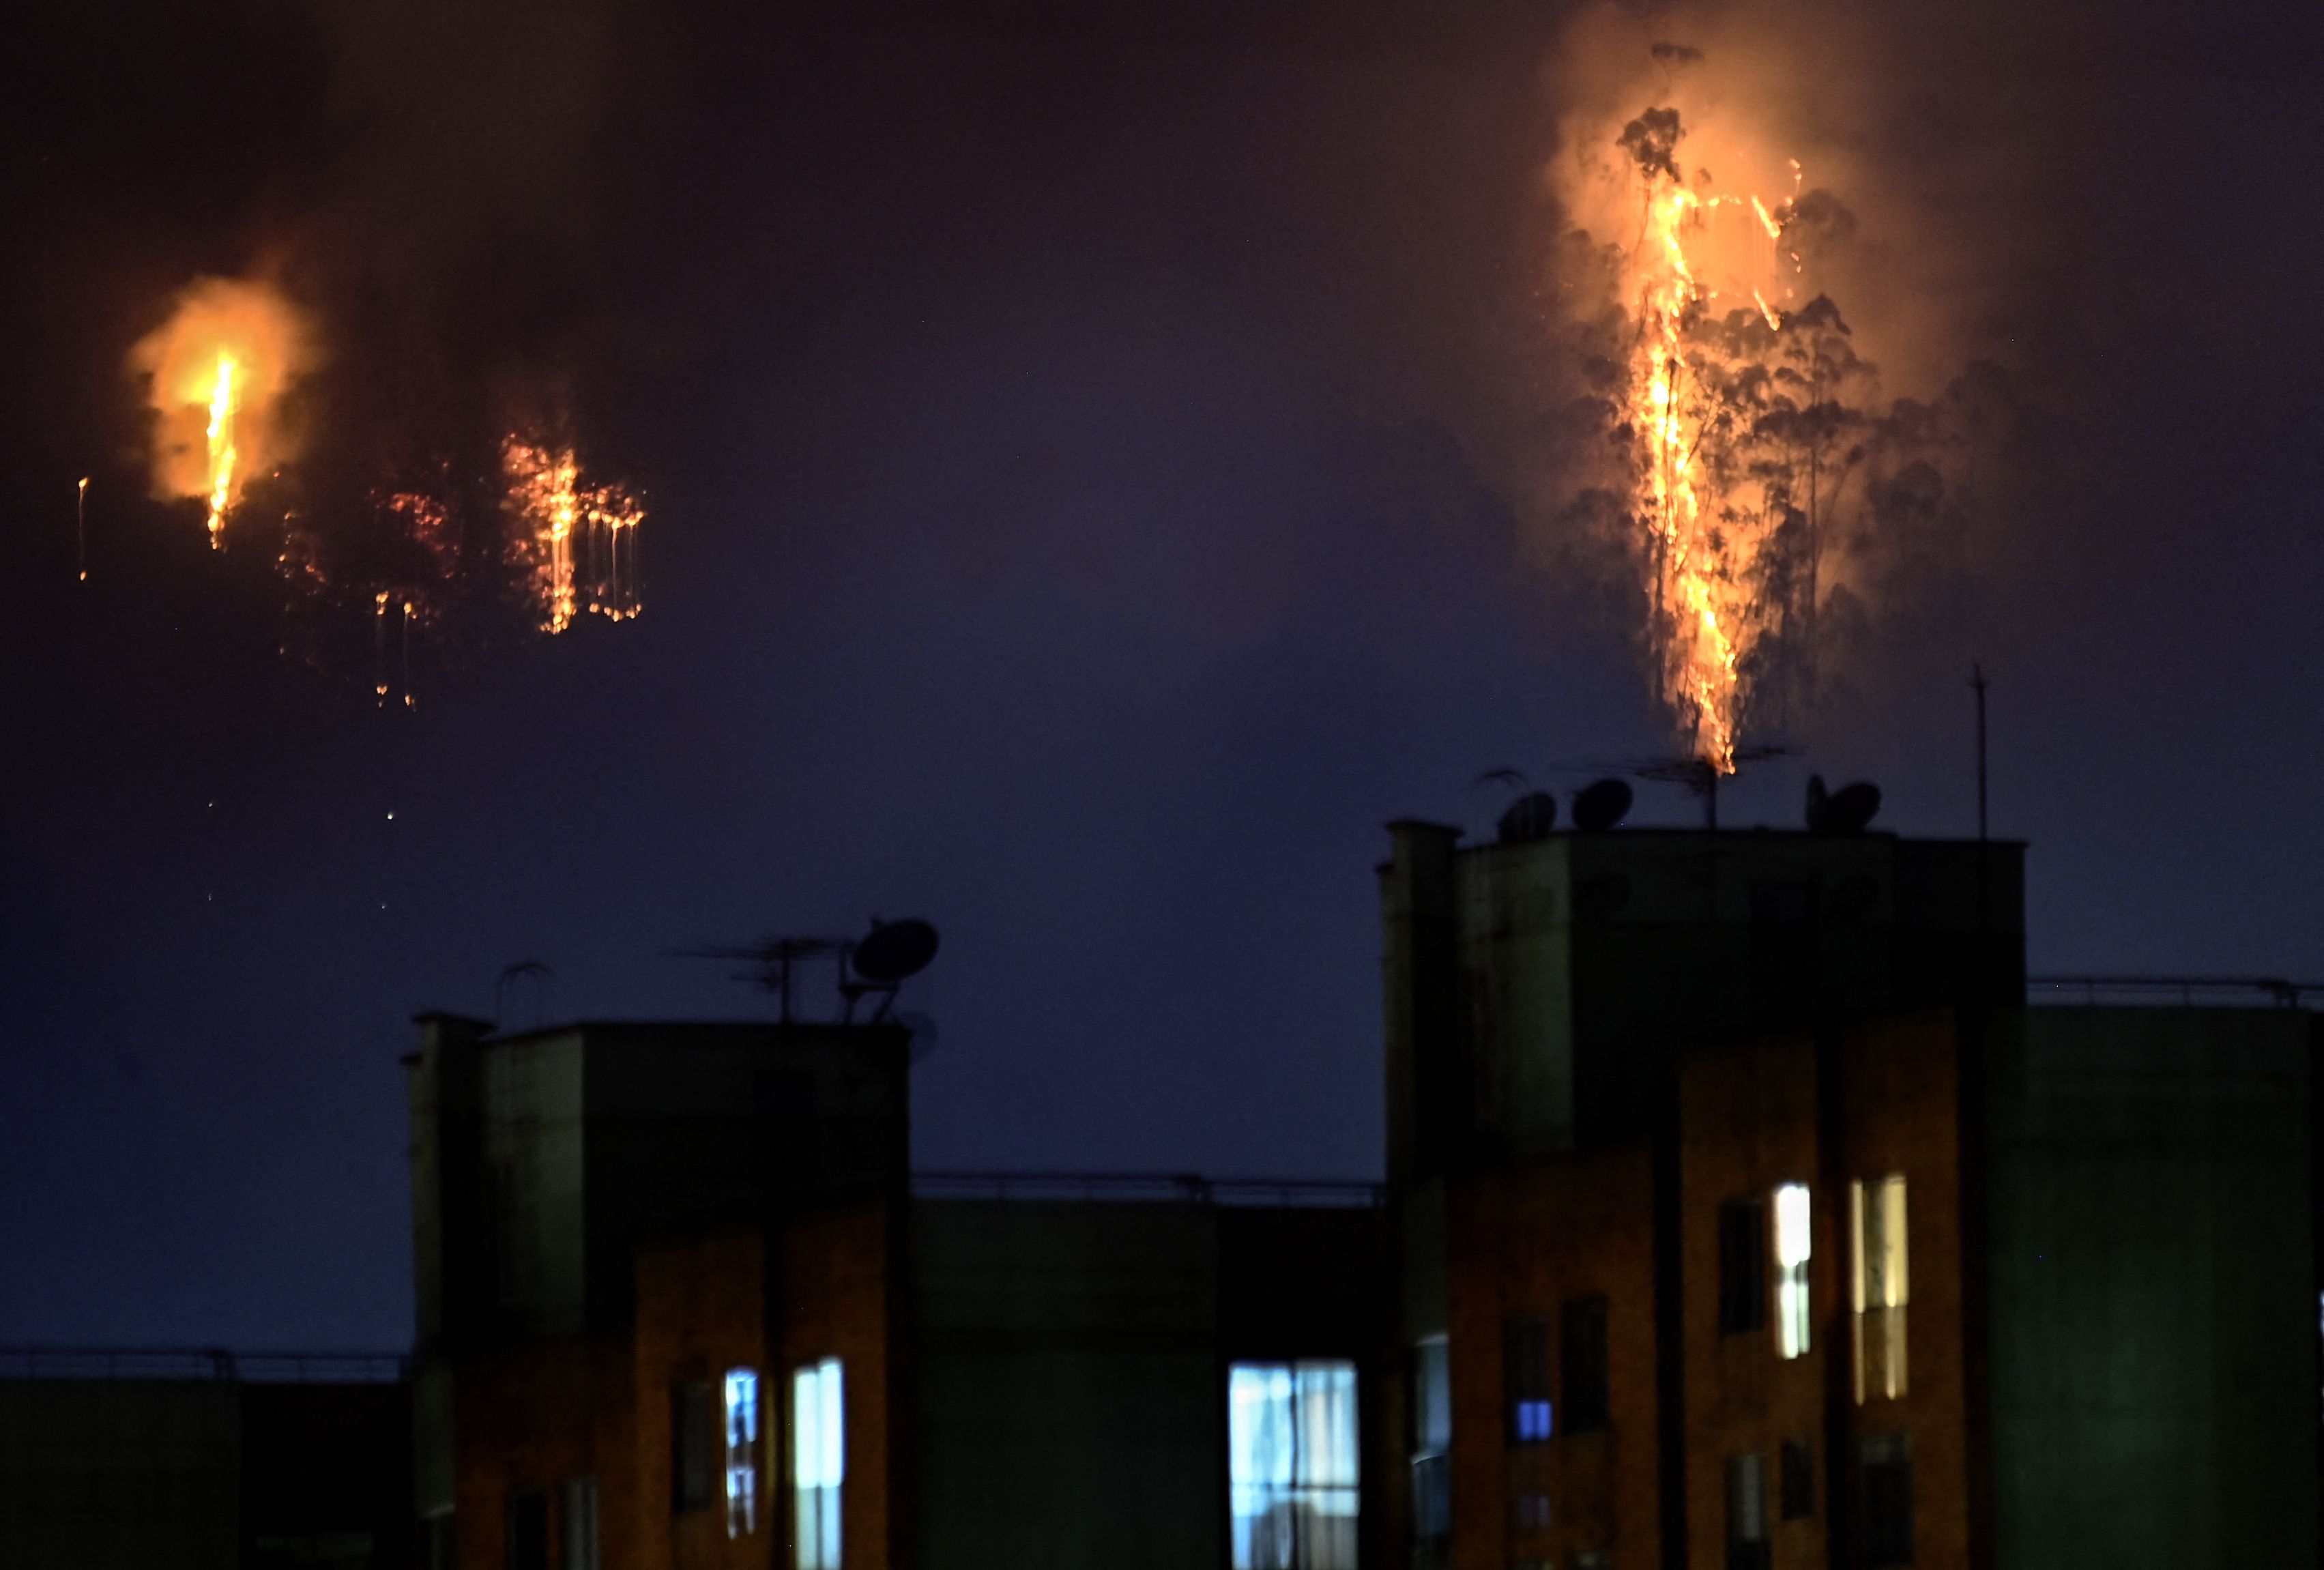 Flames are seen in the background of a photograph with apartment buildings in the foreground. 